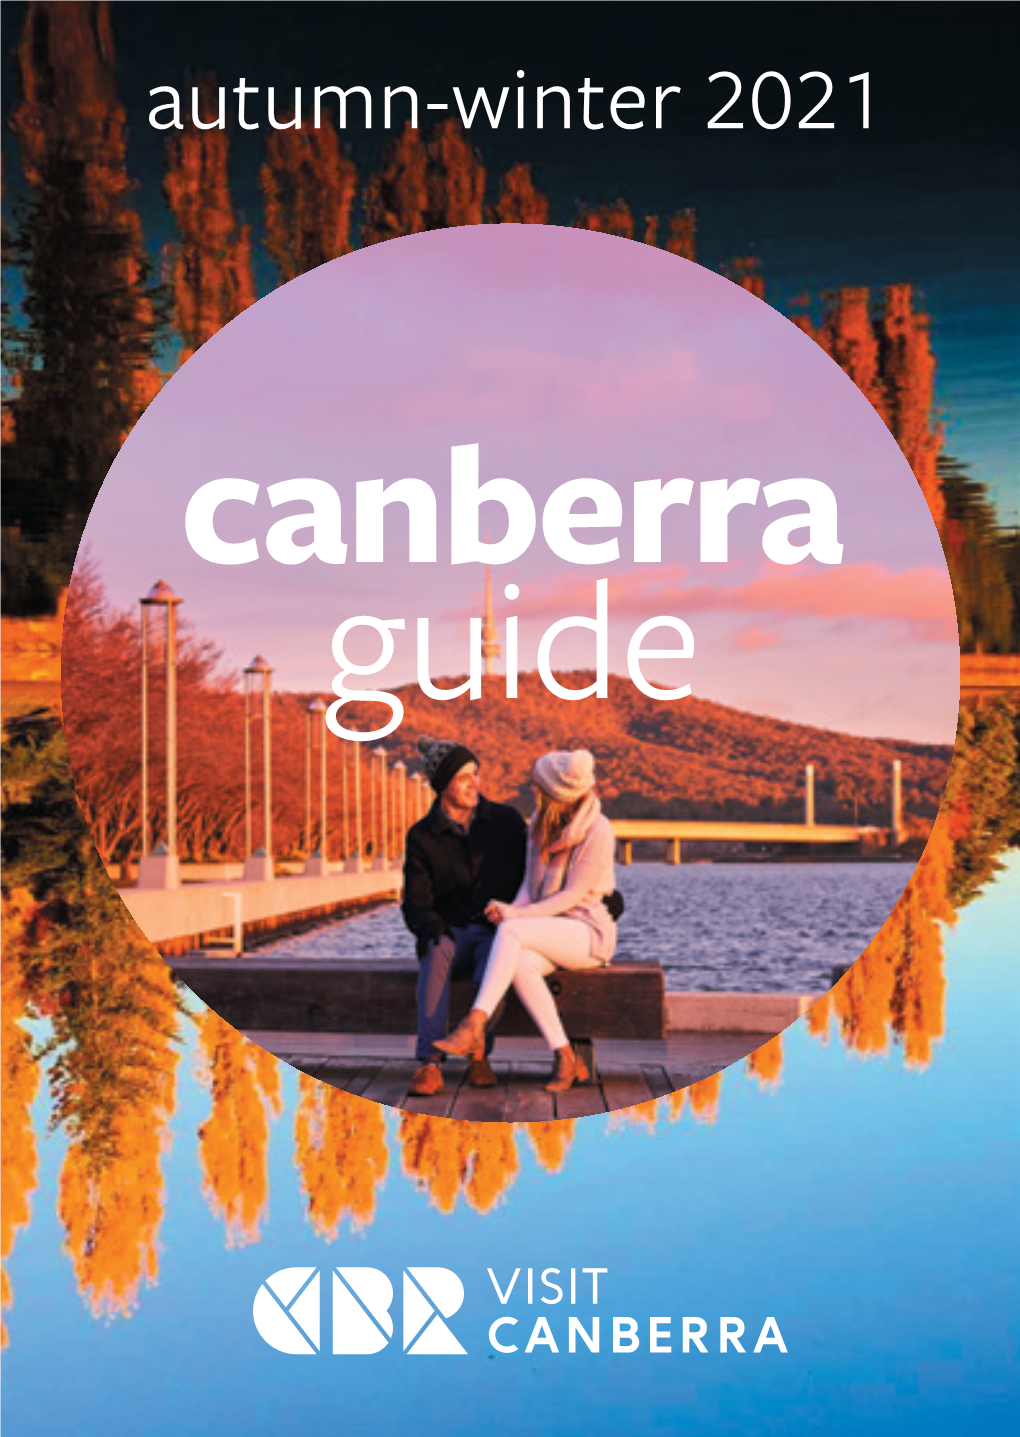 Canberra Guide STAY SAFE with the CHECK in CBR APP